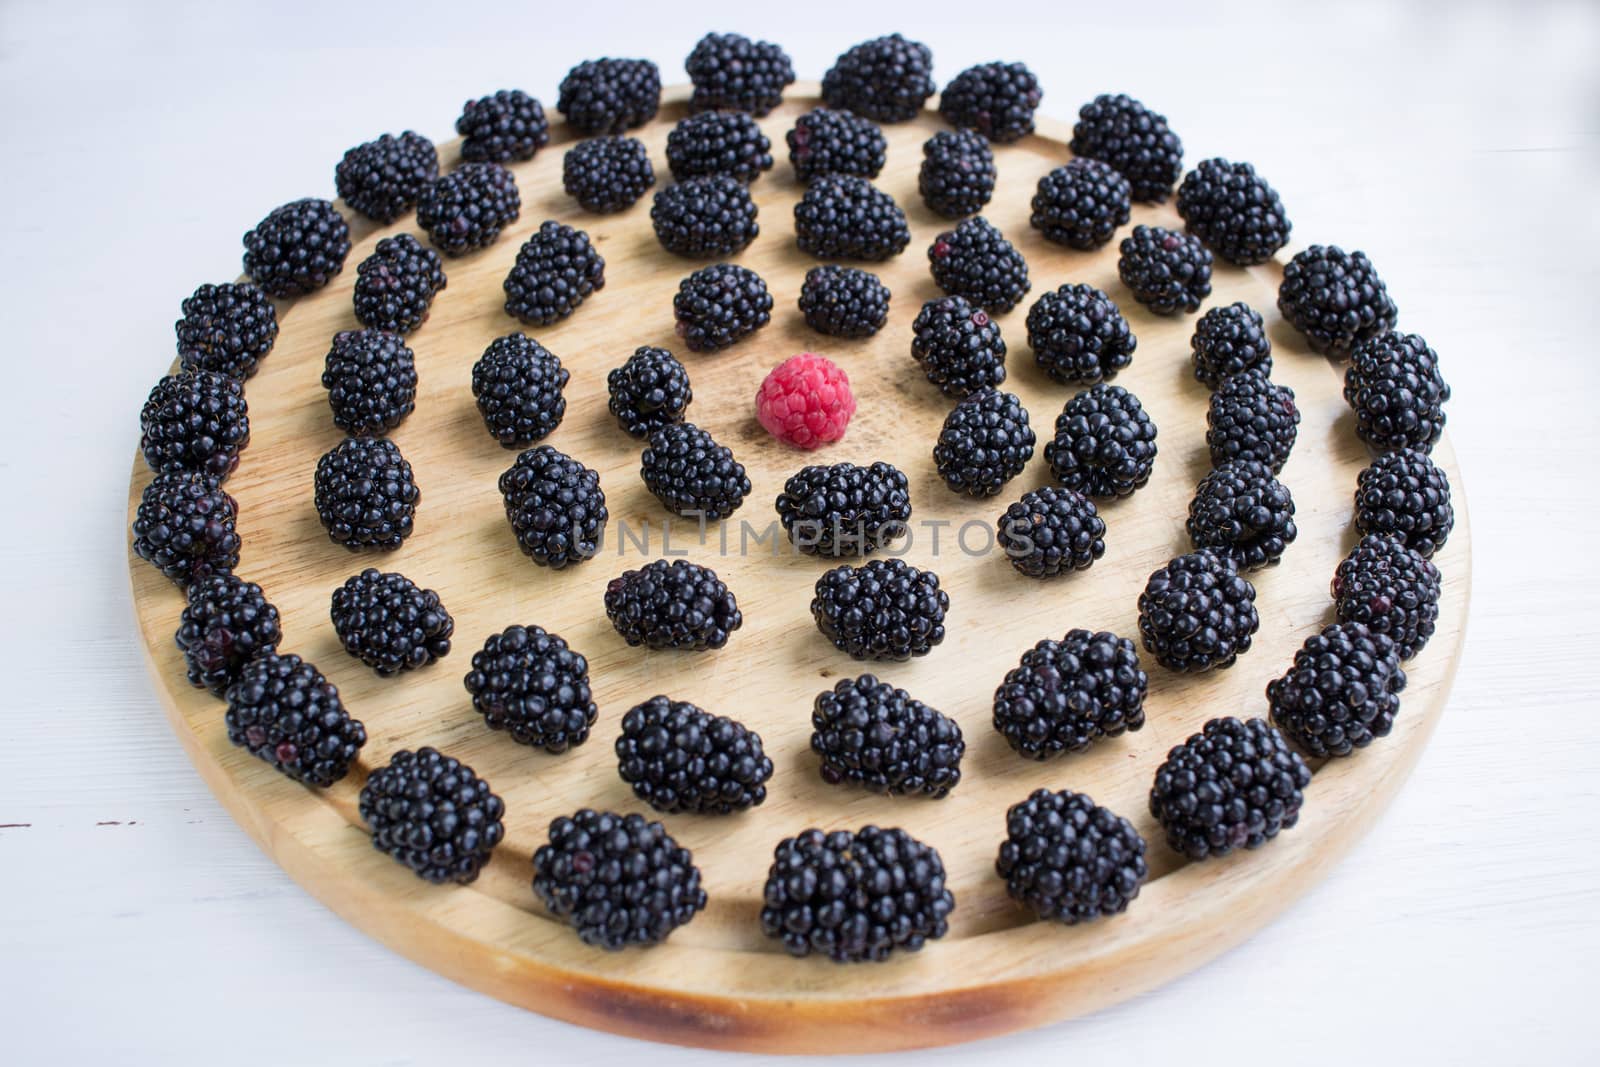 Tasty juicy berries set of many blackberries and one raspberry among them on light round wooden tray isolated